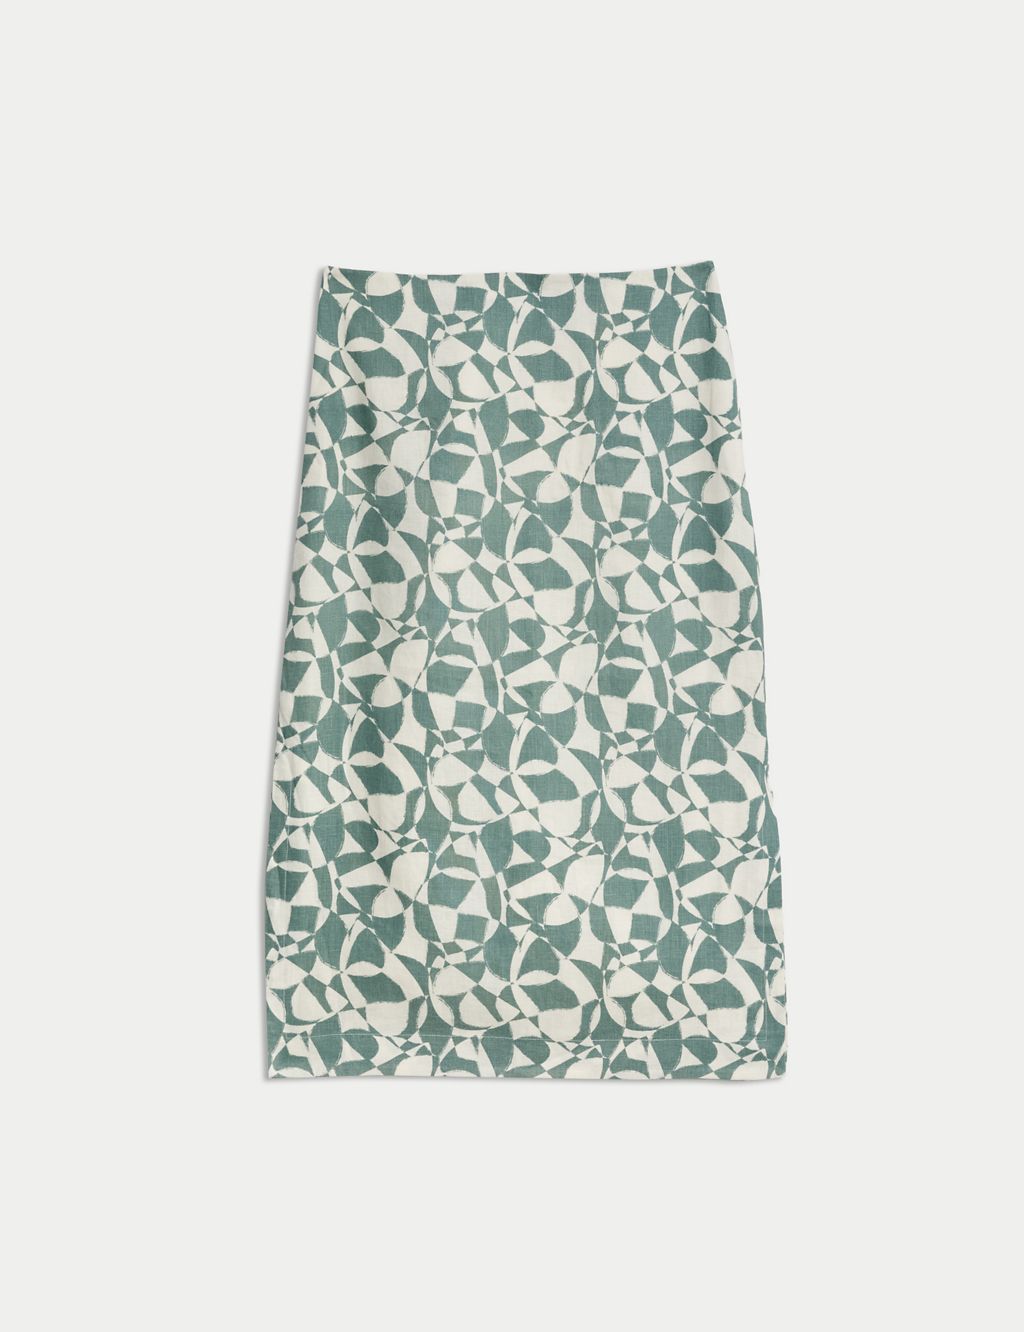 Abstract Printed Linen Skirt 1 of 6